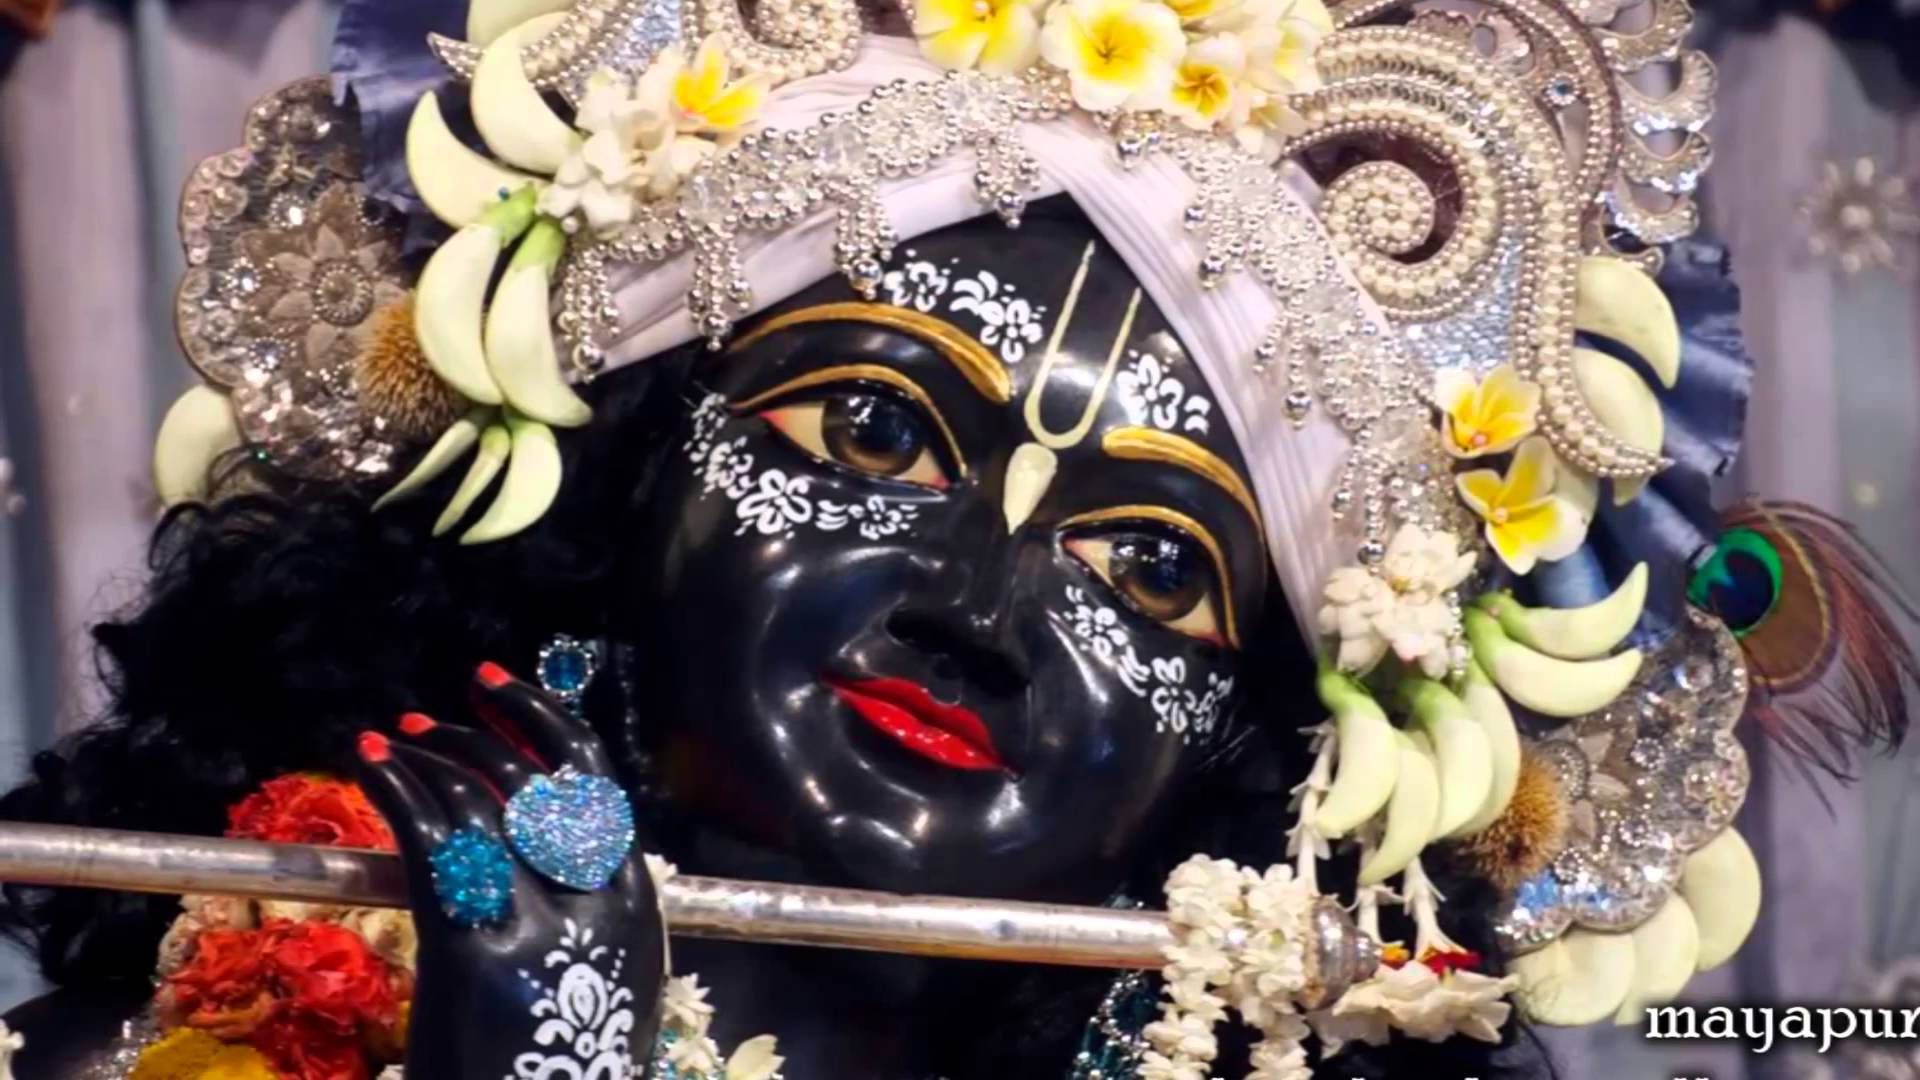 Agam Jain on Twitter Sri Sri Radha Madhava Iskcon Mayapur Surrender  simply means keeping Gods will before our own httpstcoHsvY7fU8wc   Twitter